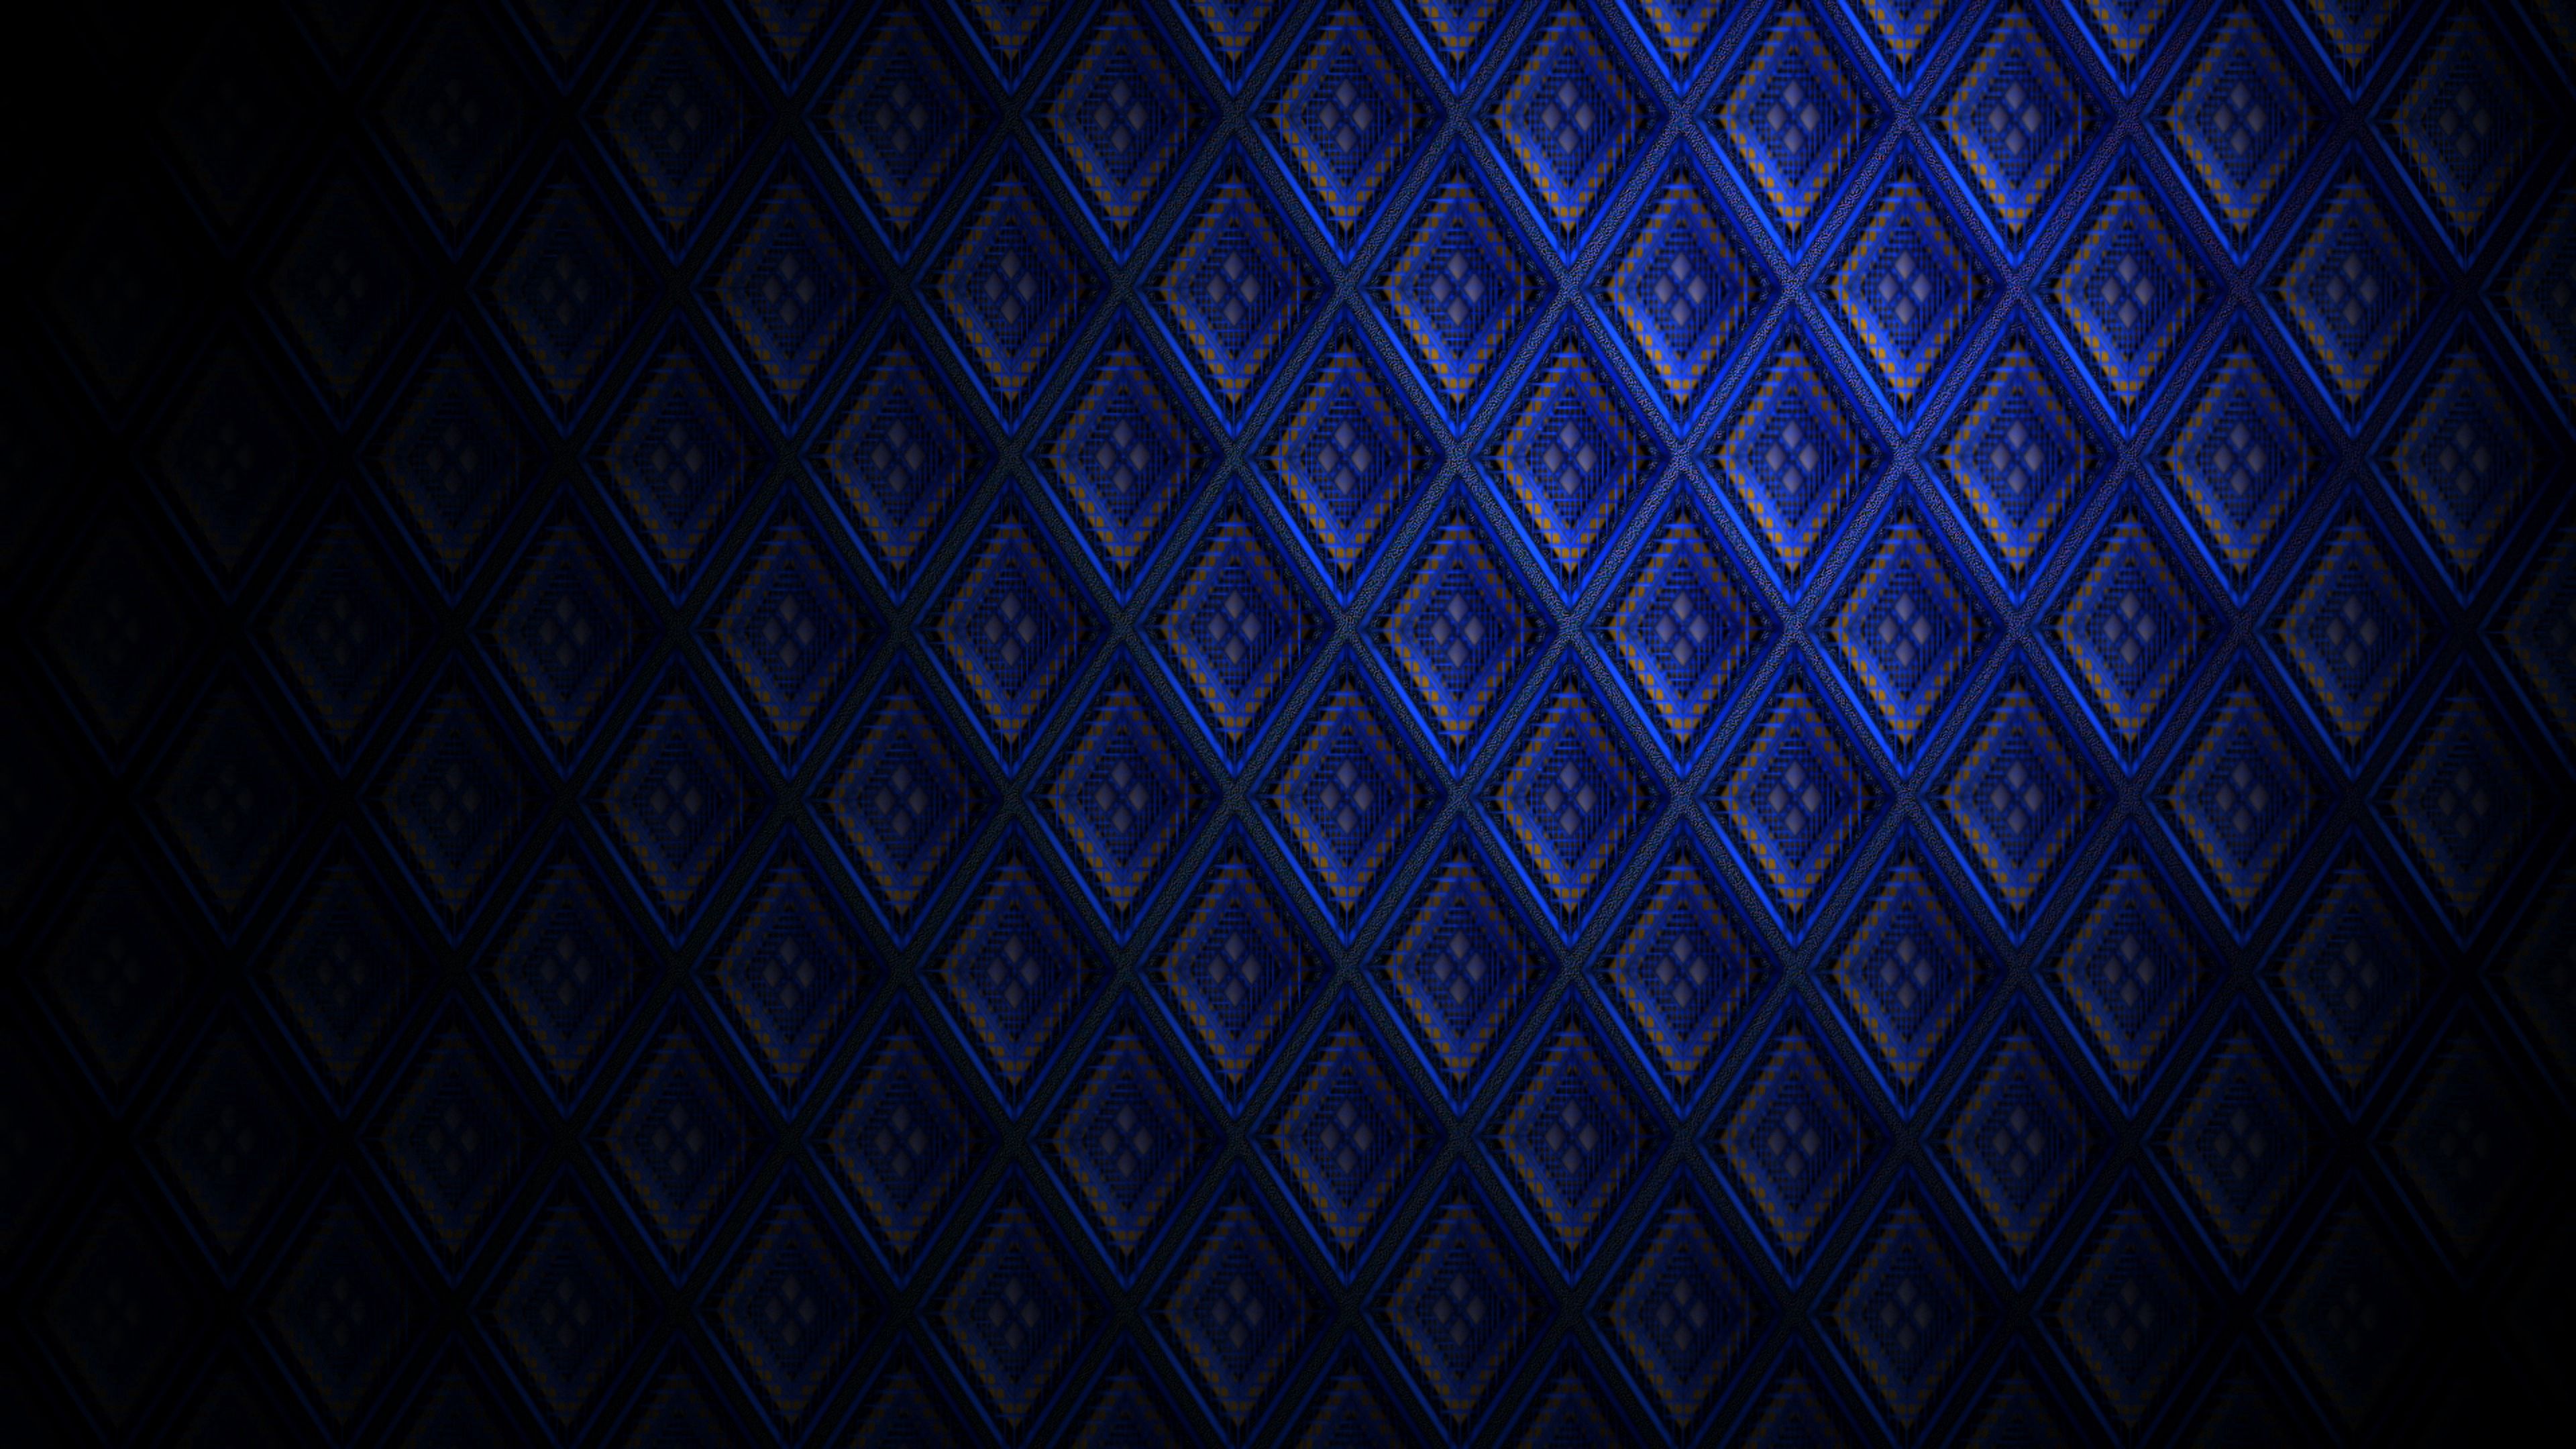 91354 download wallpaper 3d, blue, pattern, texture, volume, volumetric screensavers and pictures for free